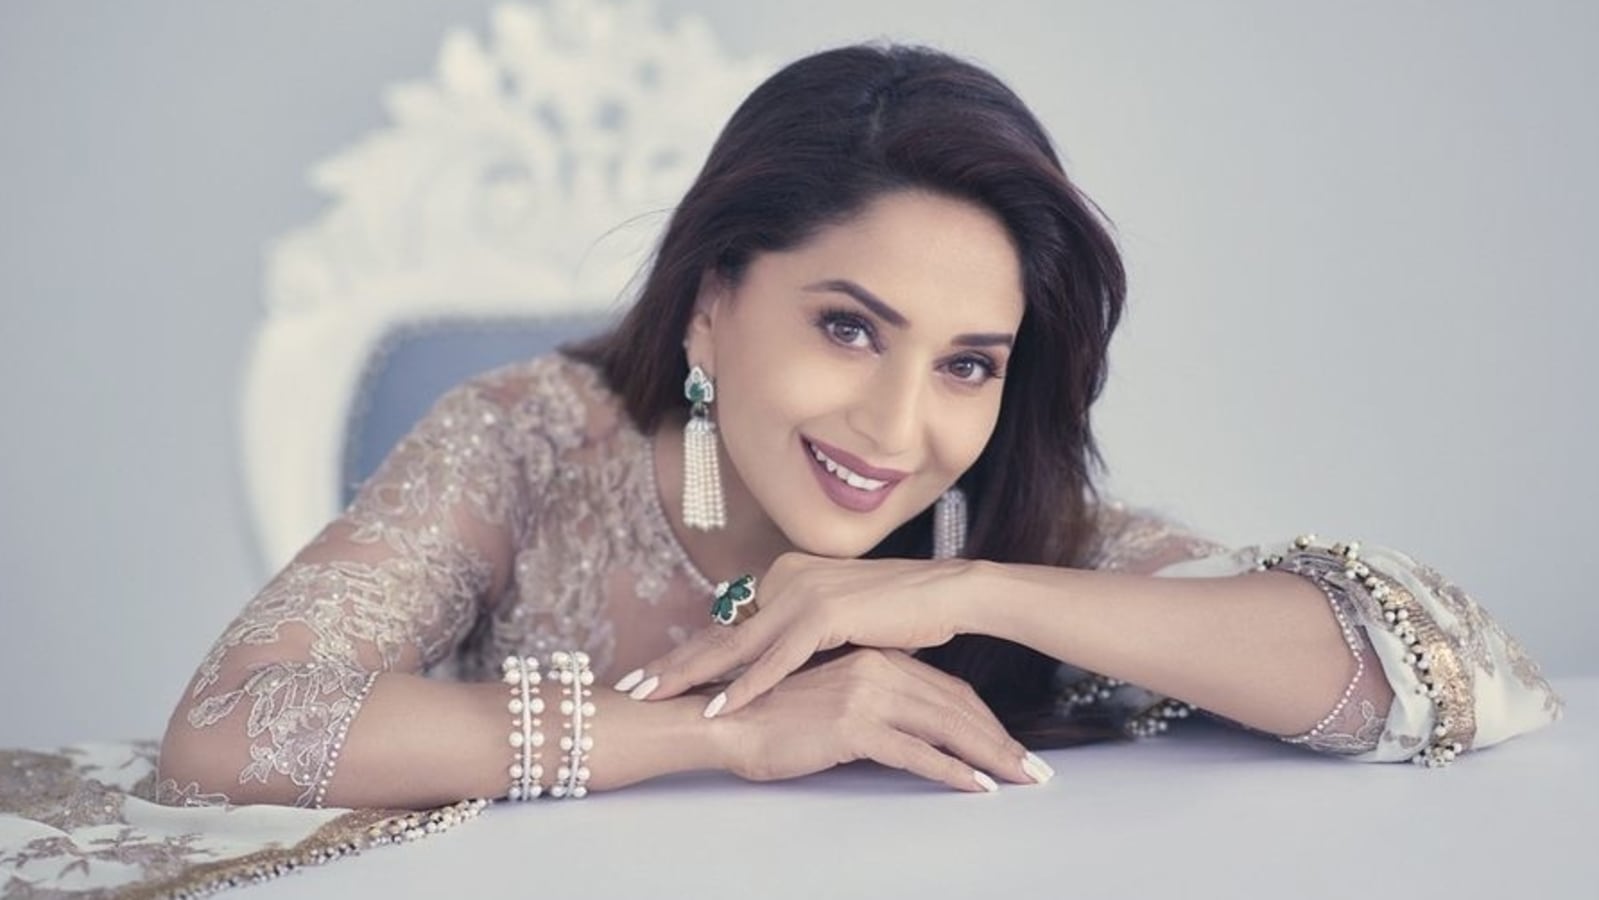 Madhuri Dixit Chut - Madhuri Dixit says 'never stop dreaming' with new photos, Mouni Roy calls  her 'timeless beauty' | Bollywood - Hindustan Times